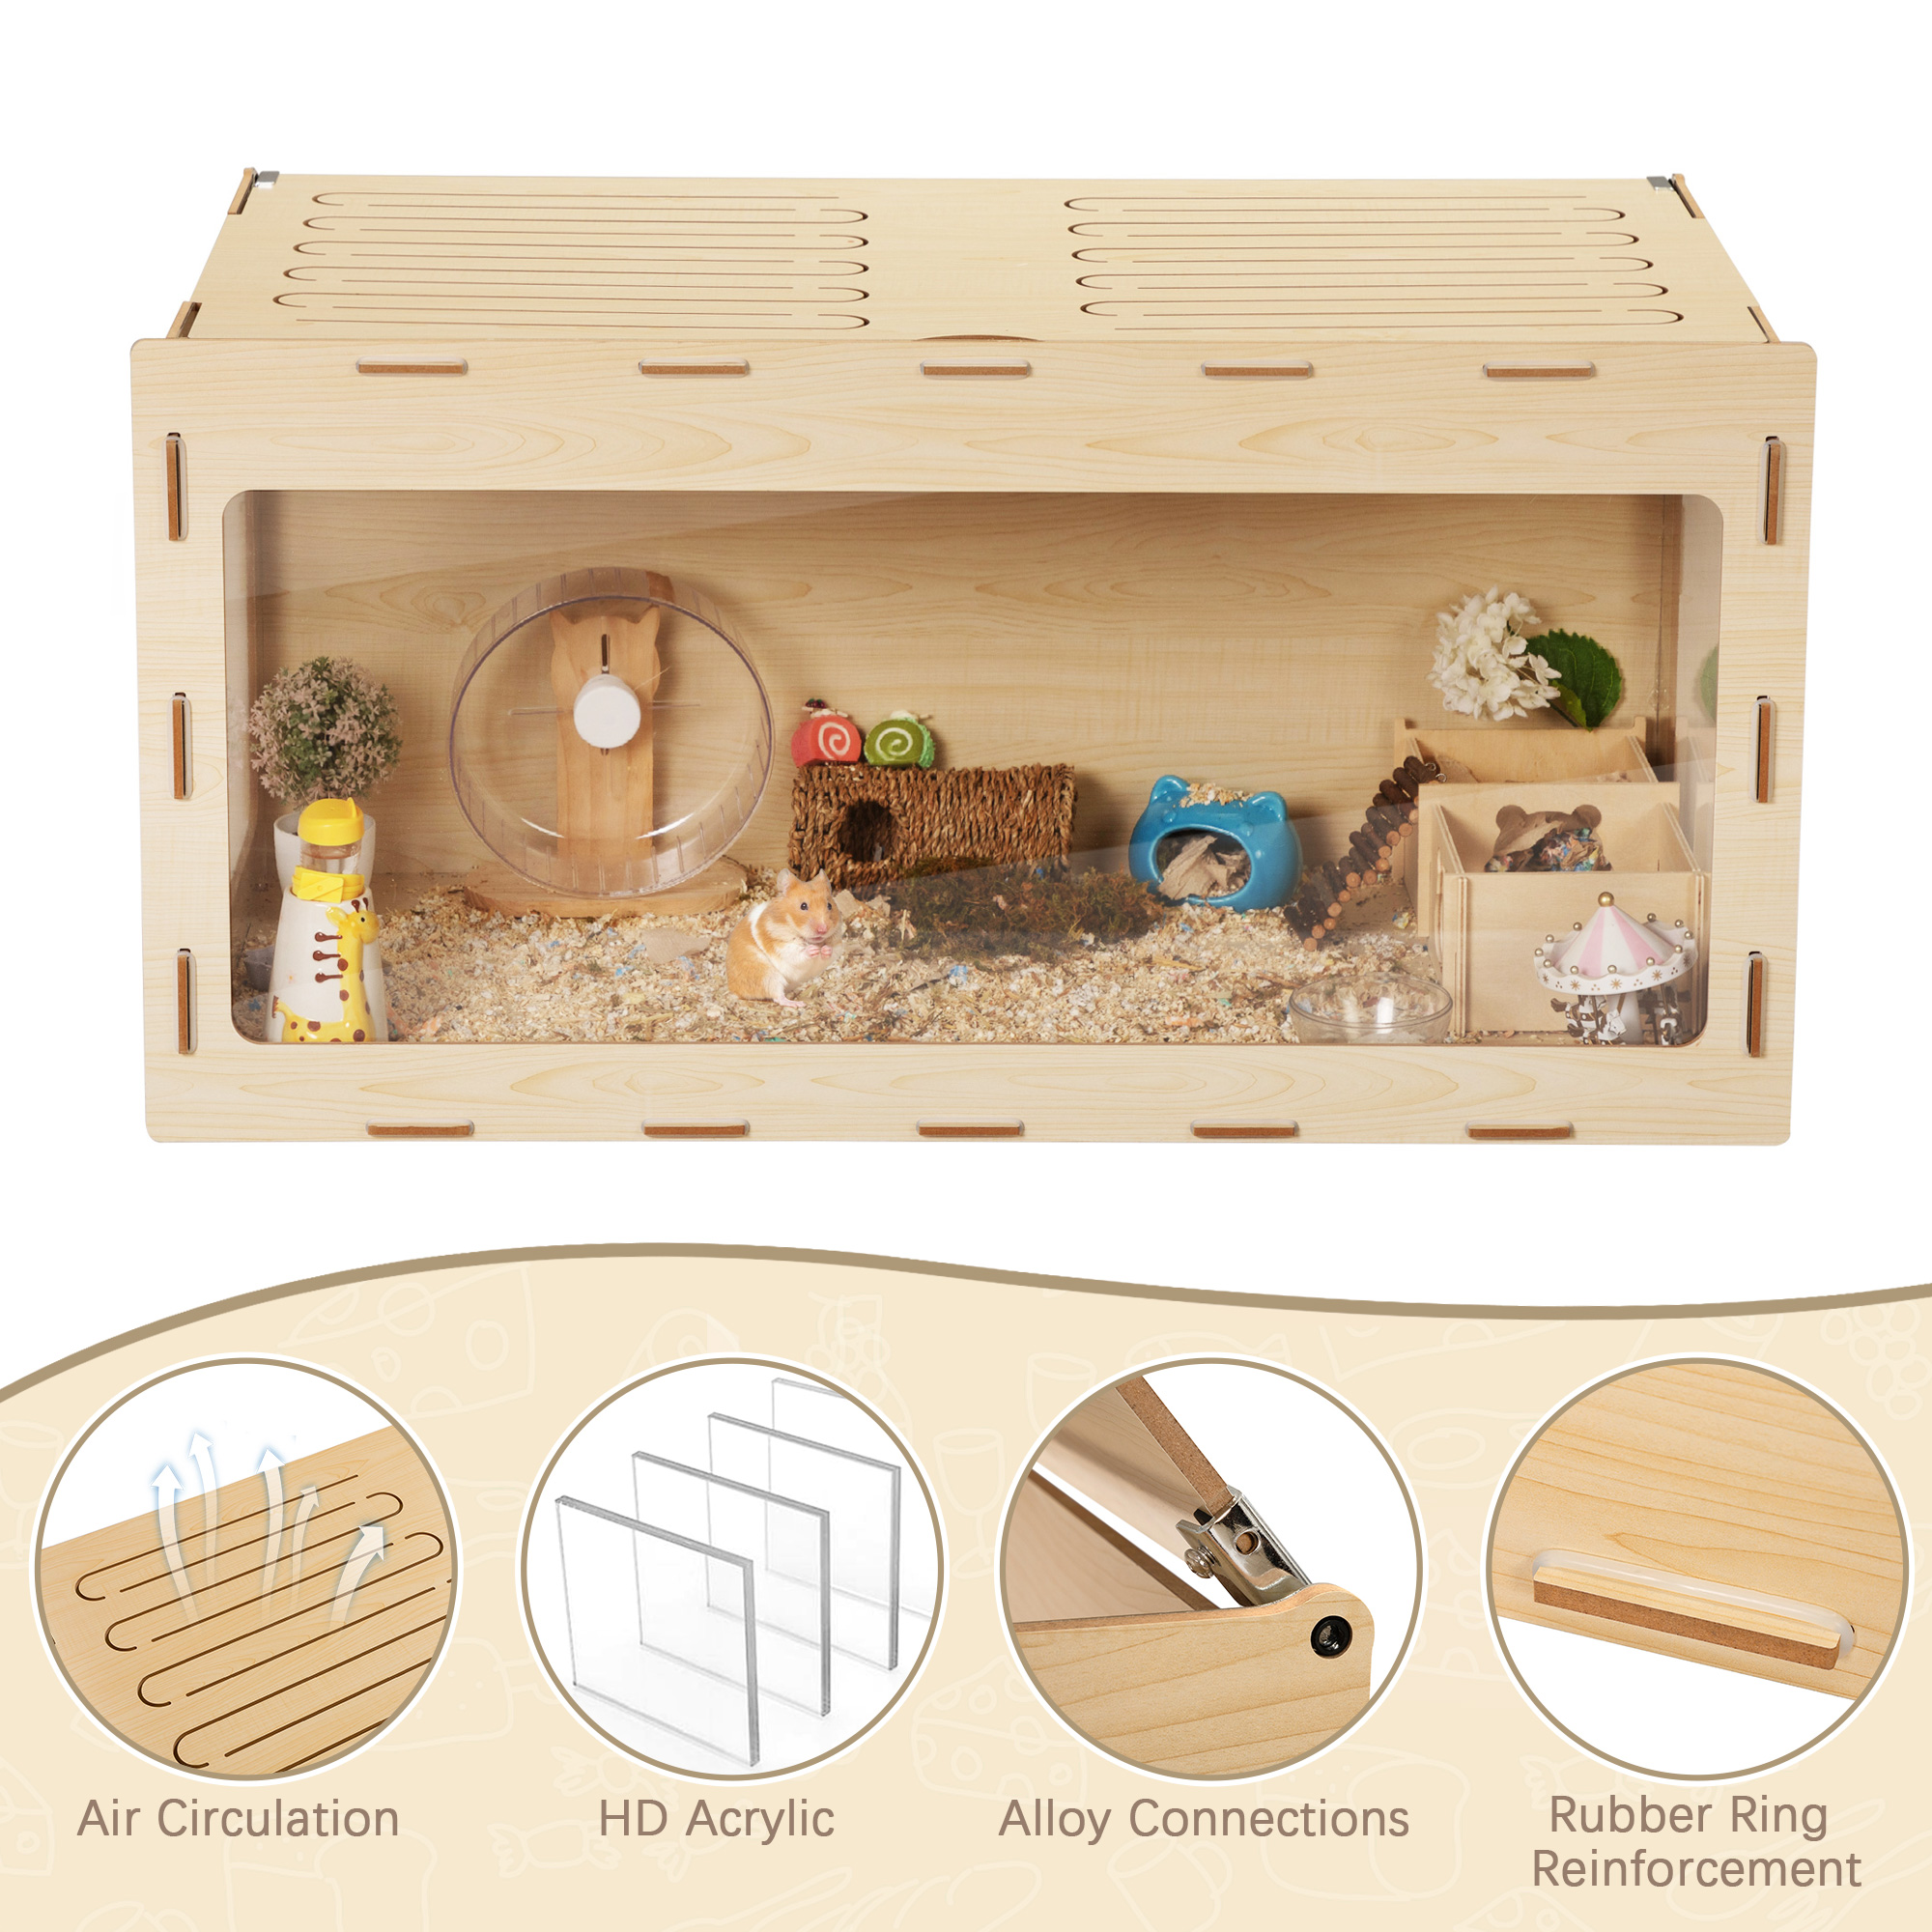 COZIWOW Wooden Hamster Habitat Small Animal Hutch and Exercise Play House Acrylic Hutch for Hamster, Guinea Pig, Chinchilla